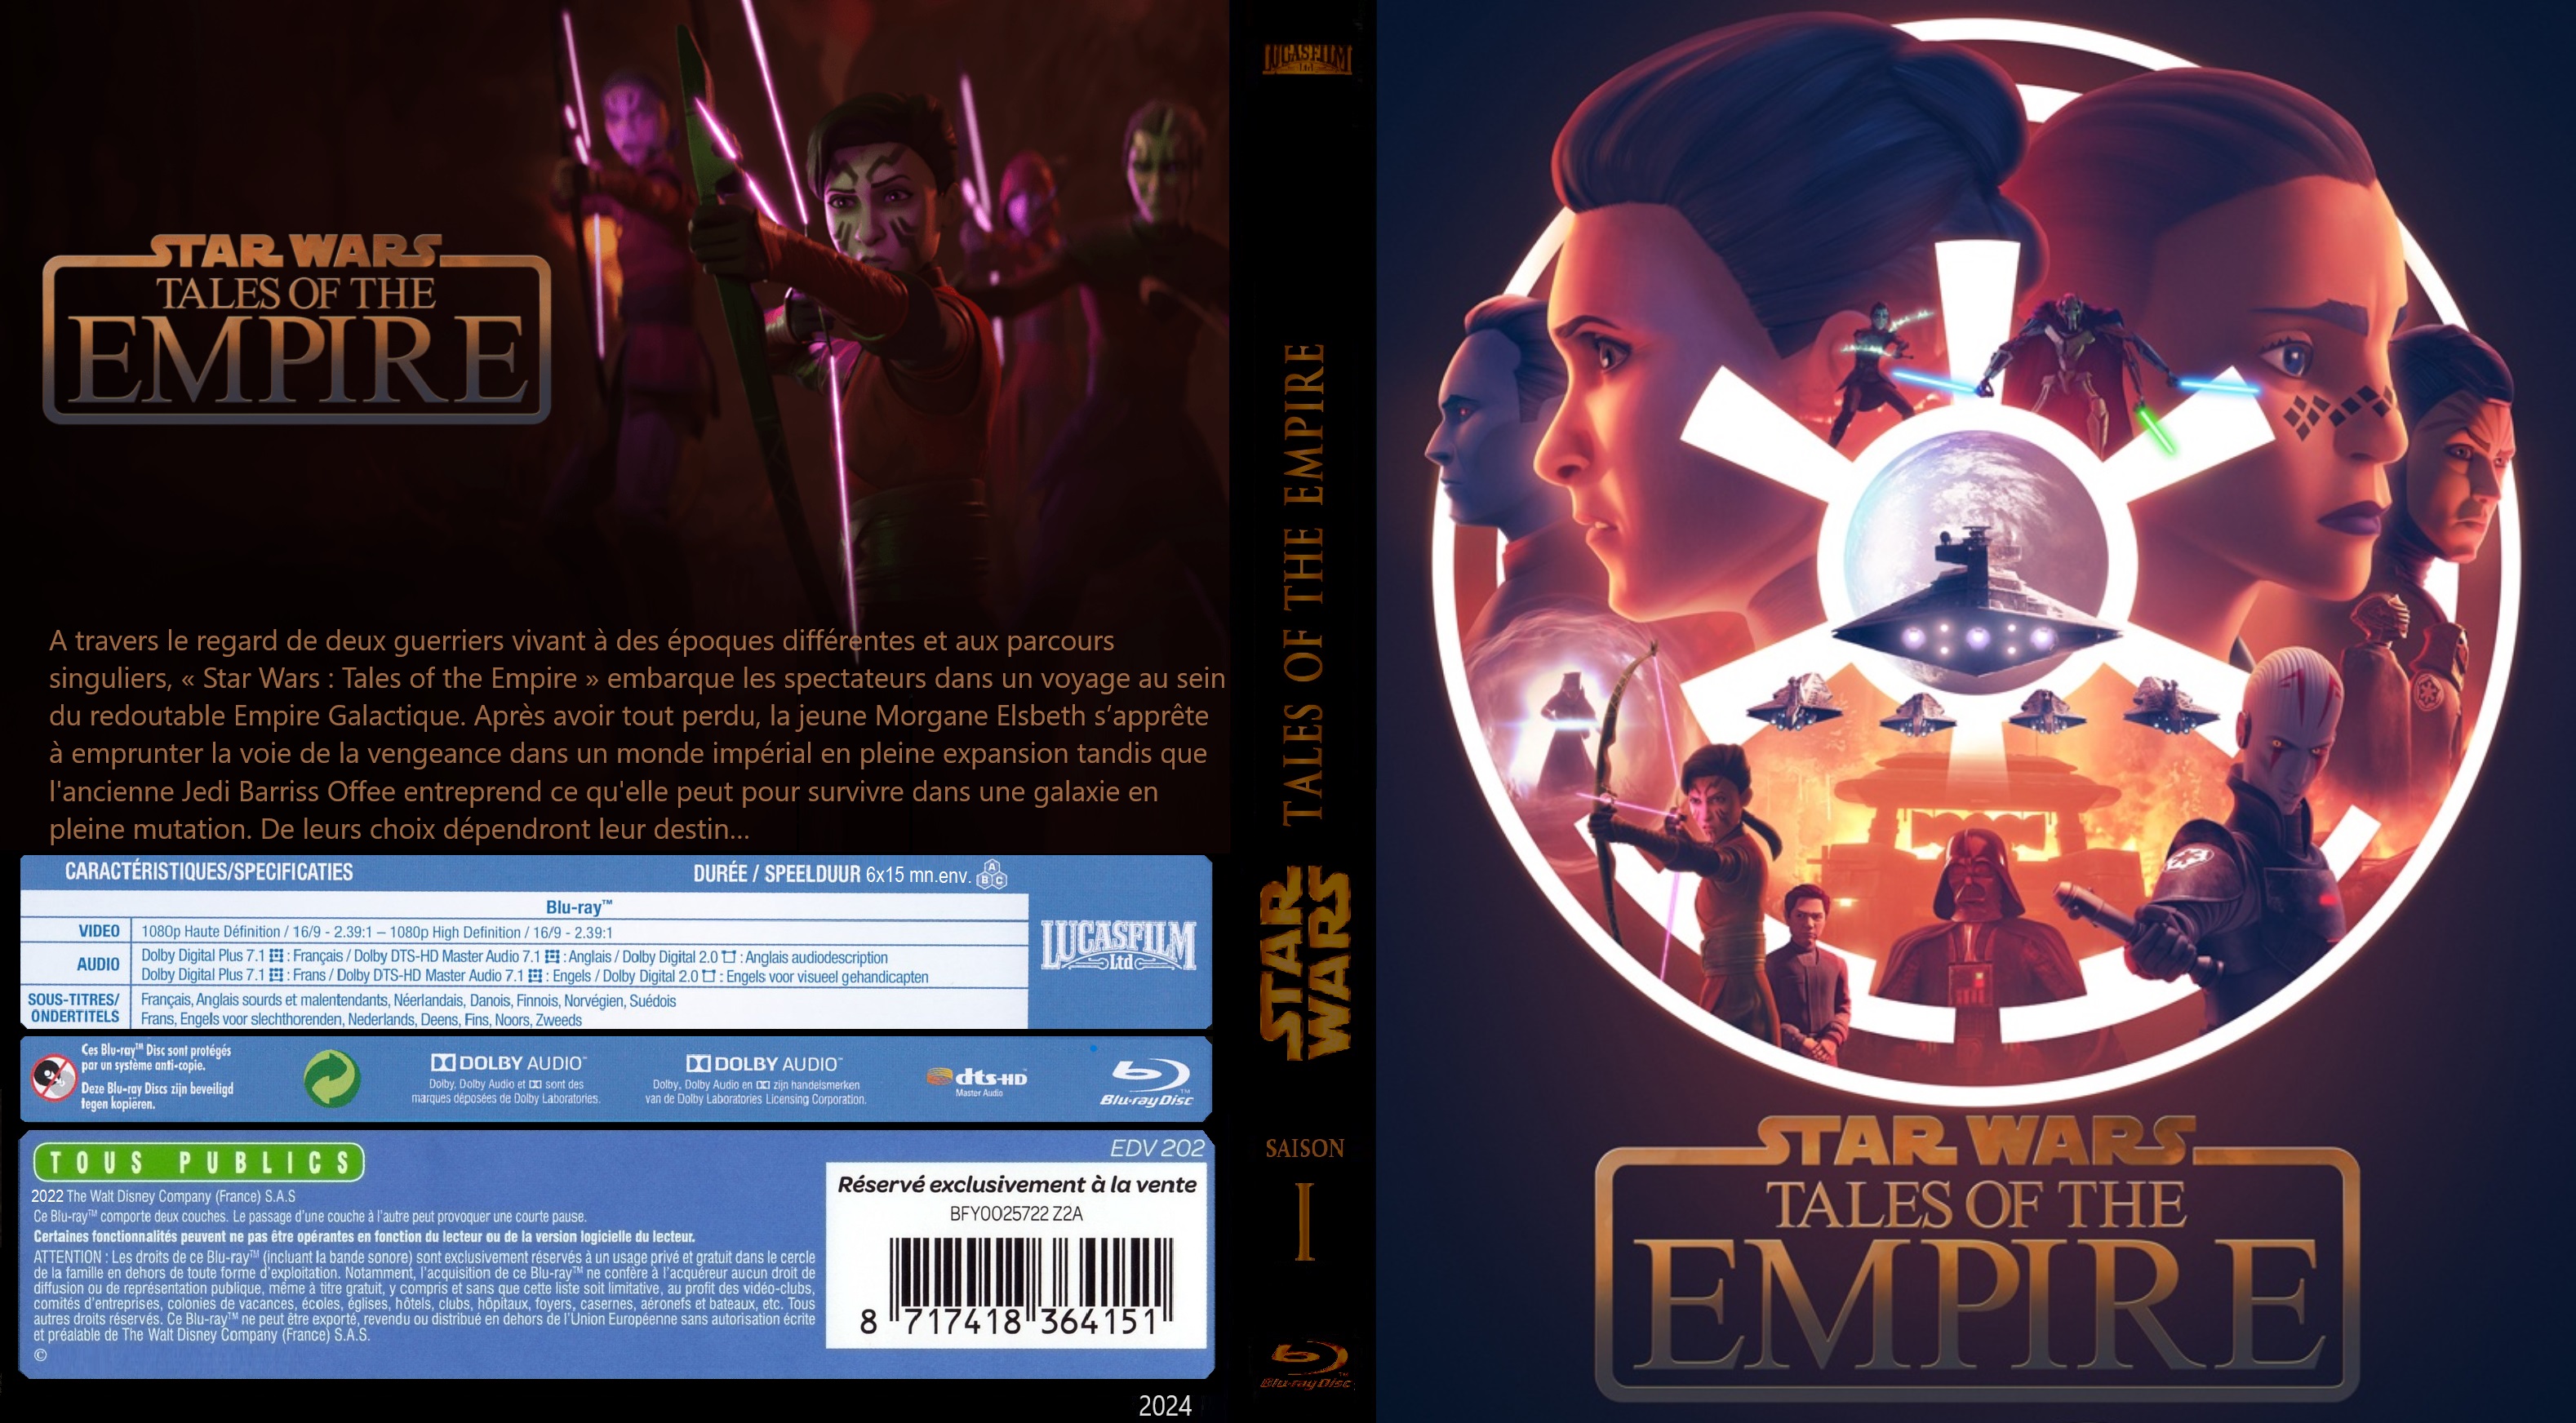 Jaquette DVD Star Wars Tales of the Empire Saison 1 custom (BLU-RAY)